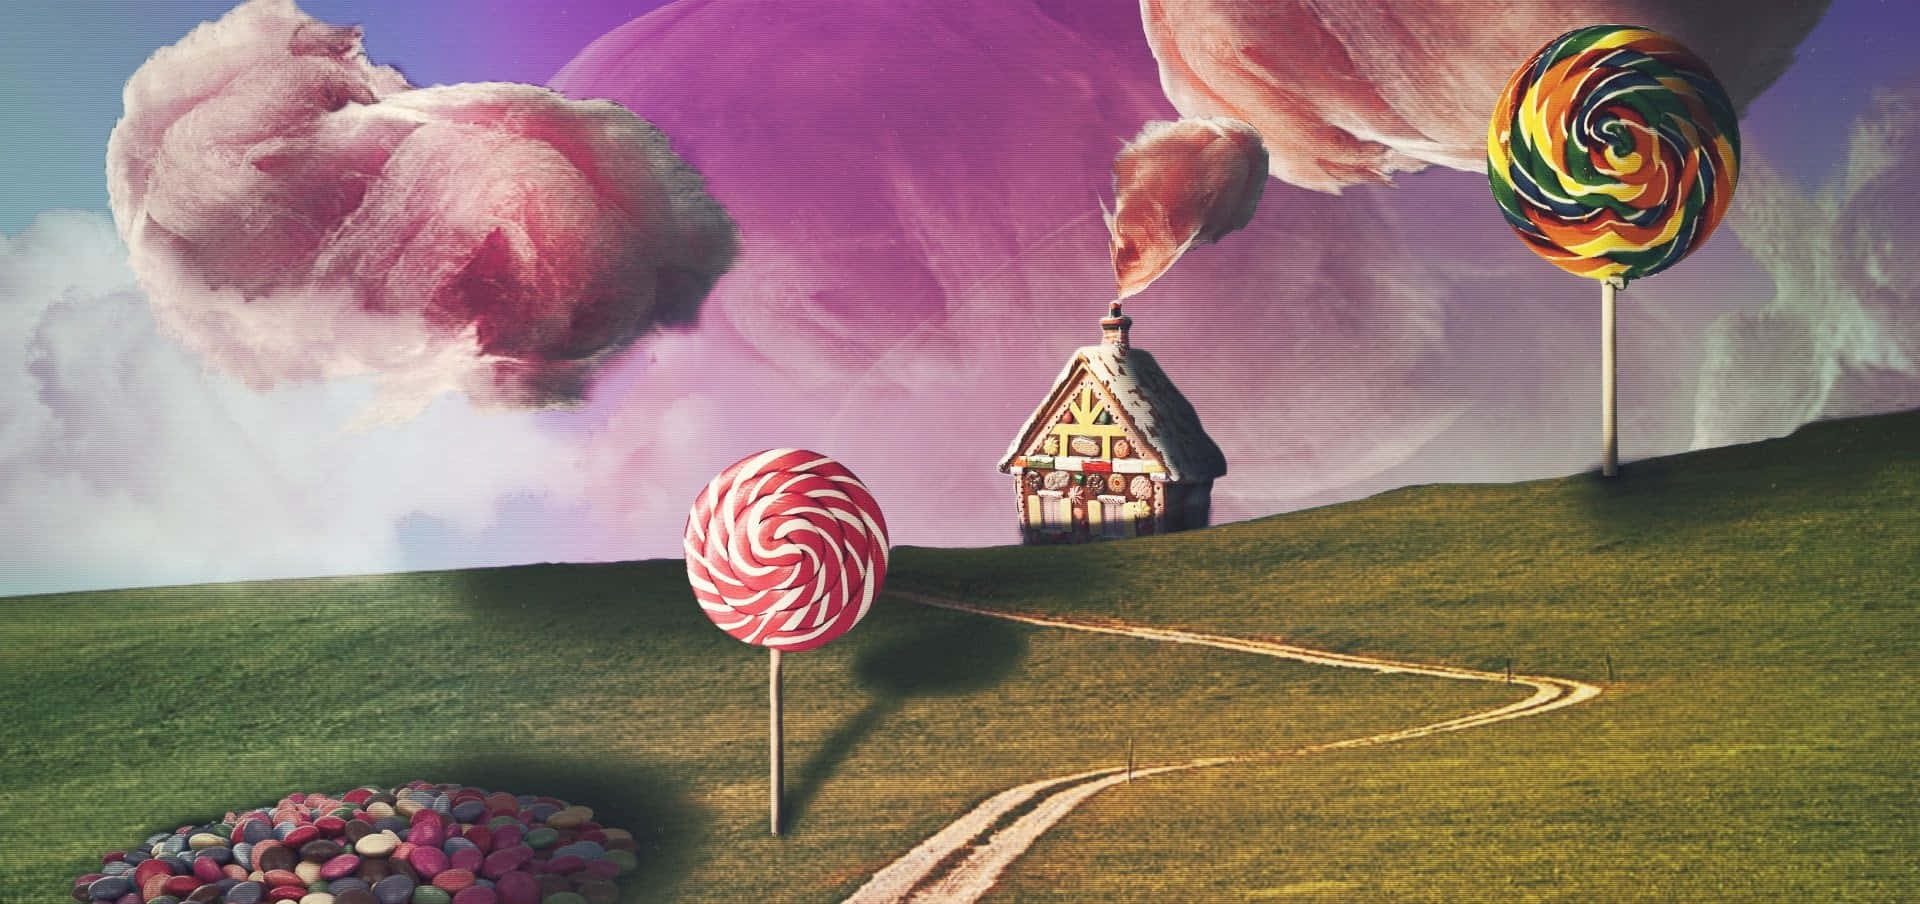 Let’s Take a Trip Into Candyland Wallpaper